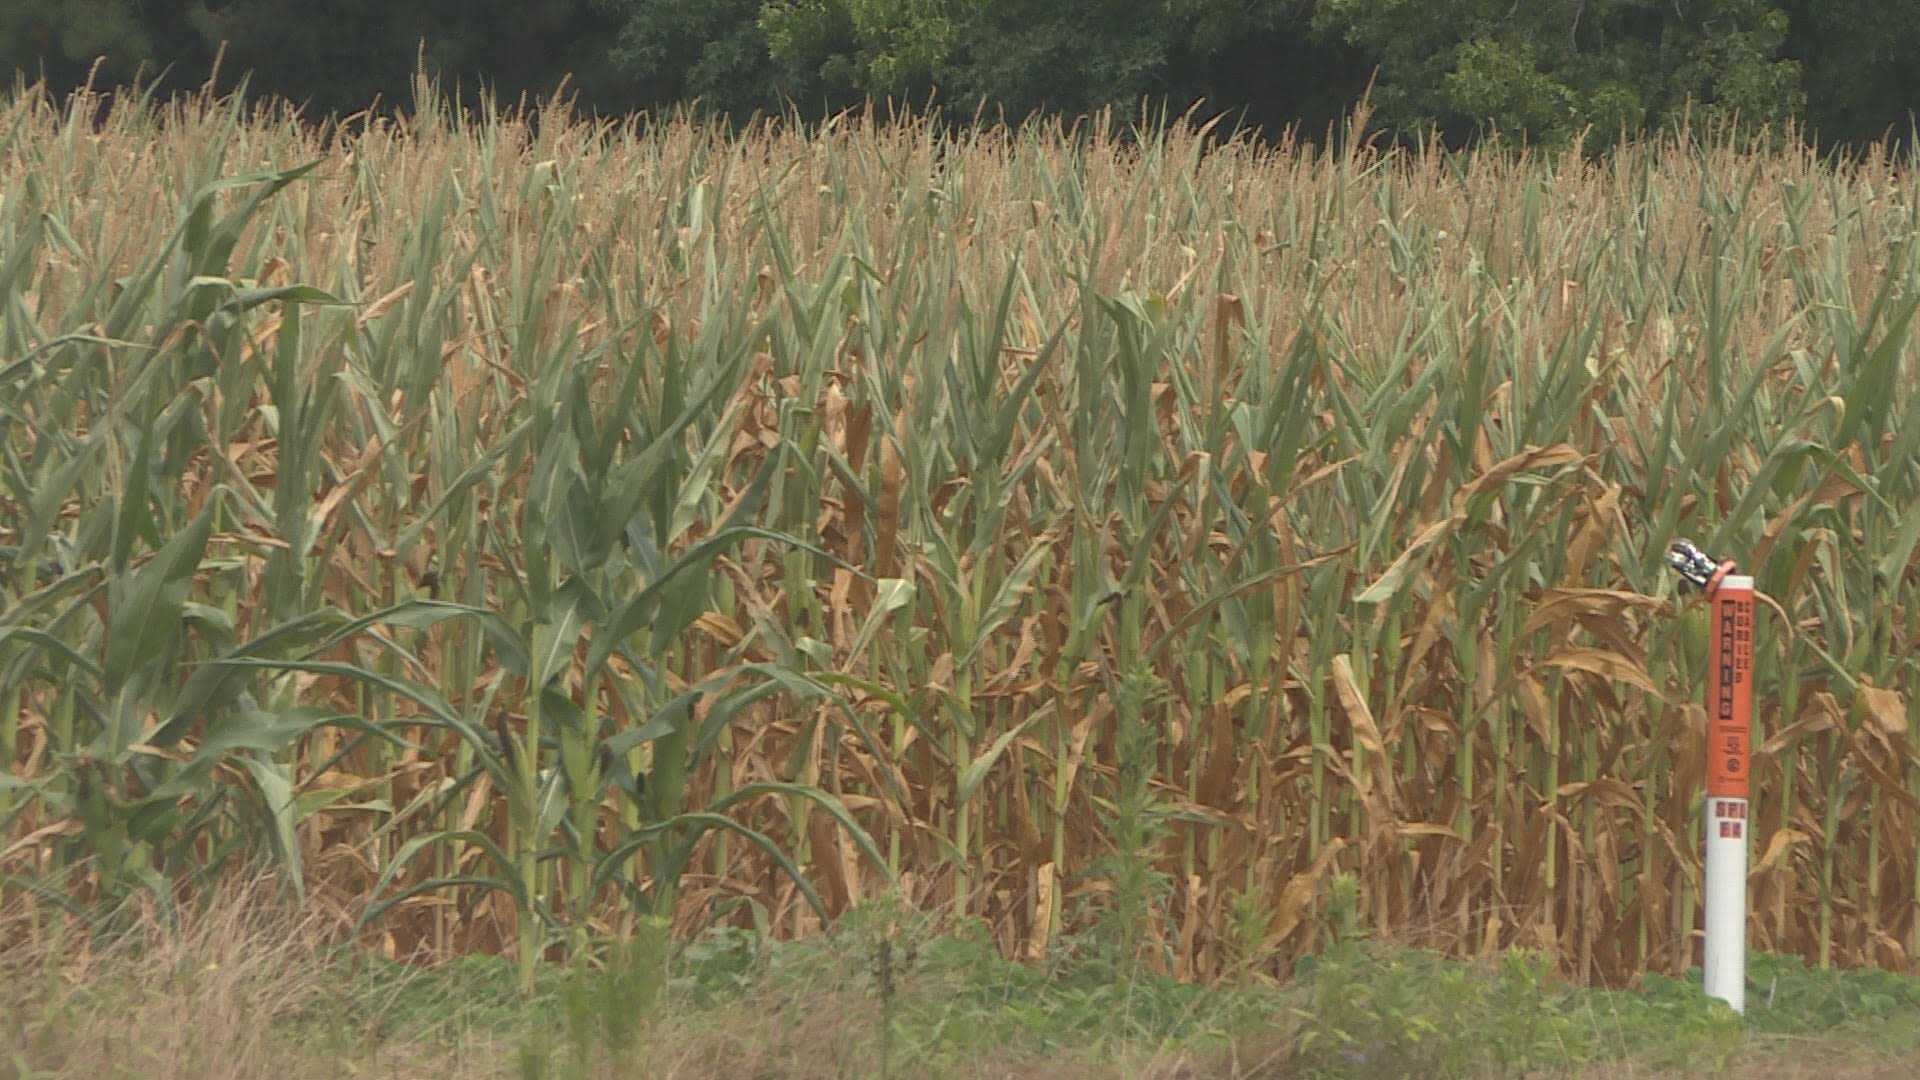 Natural disaster declared in N.C. due to drought, eligible farmers may be able to receive assistance | Fox Wilmington WSFX-TV